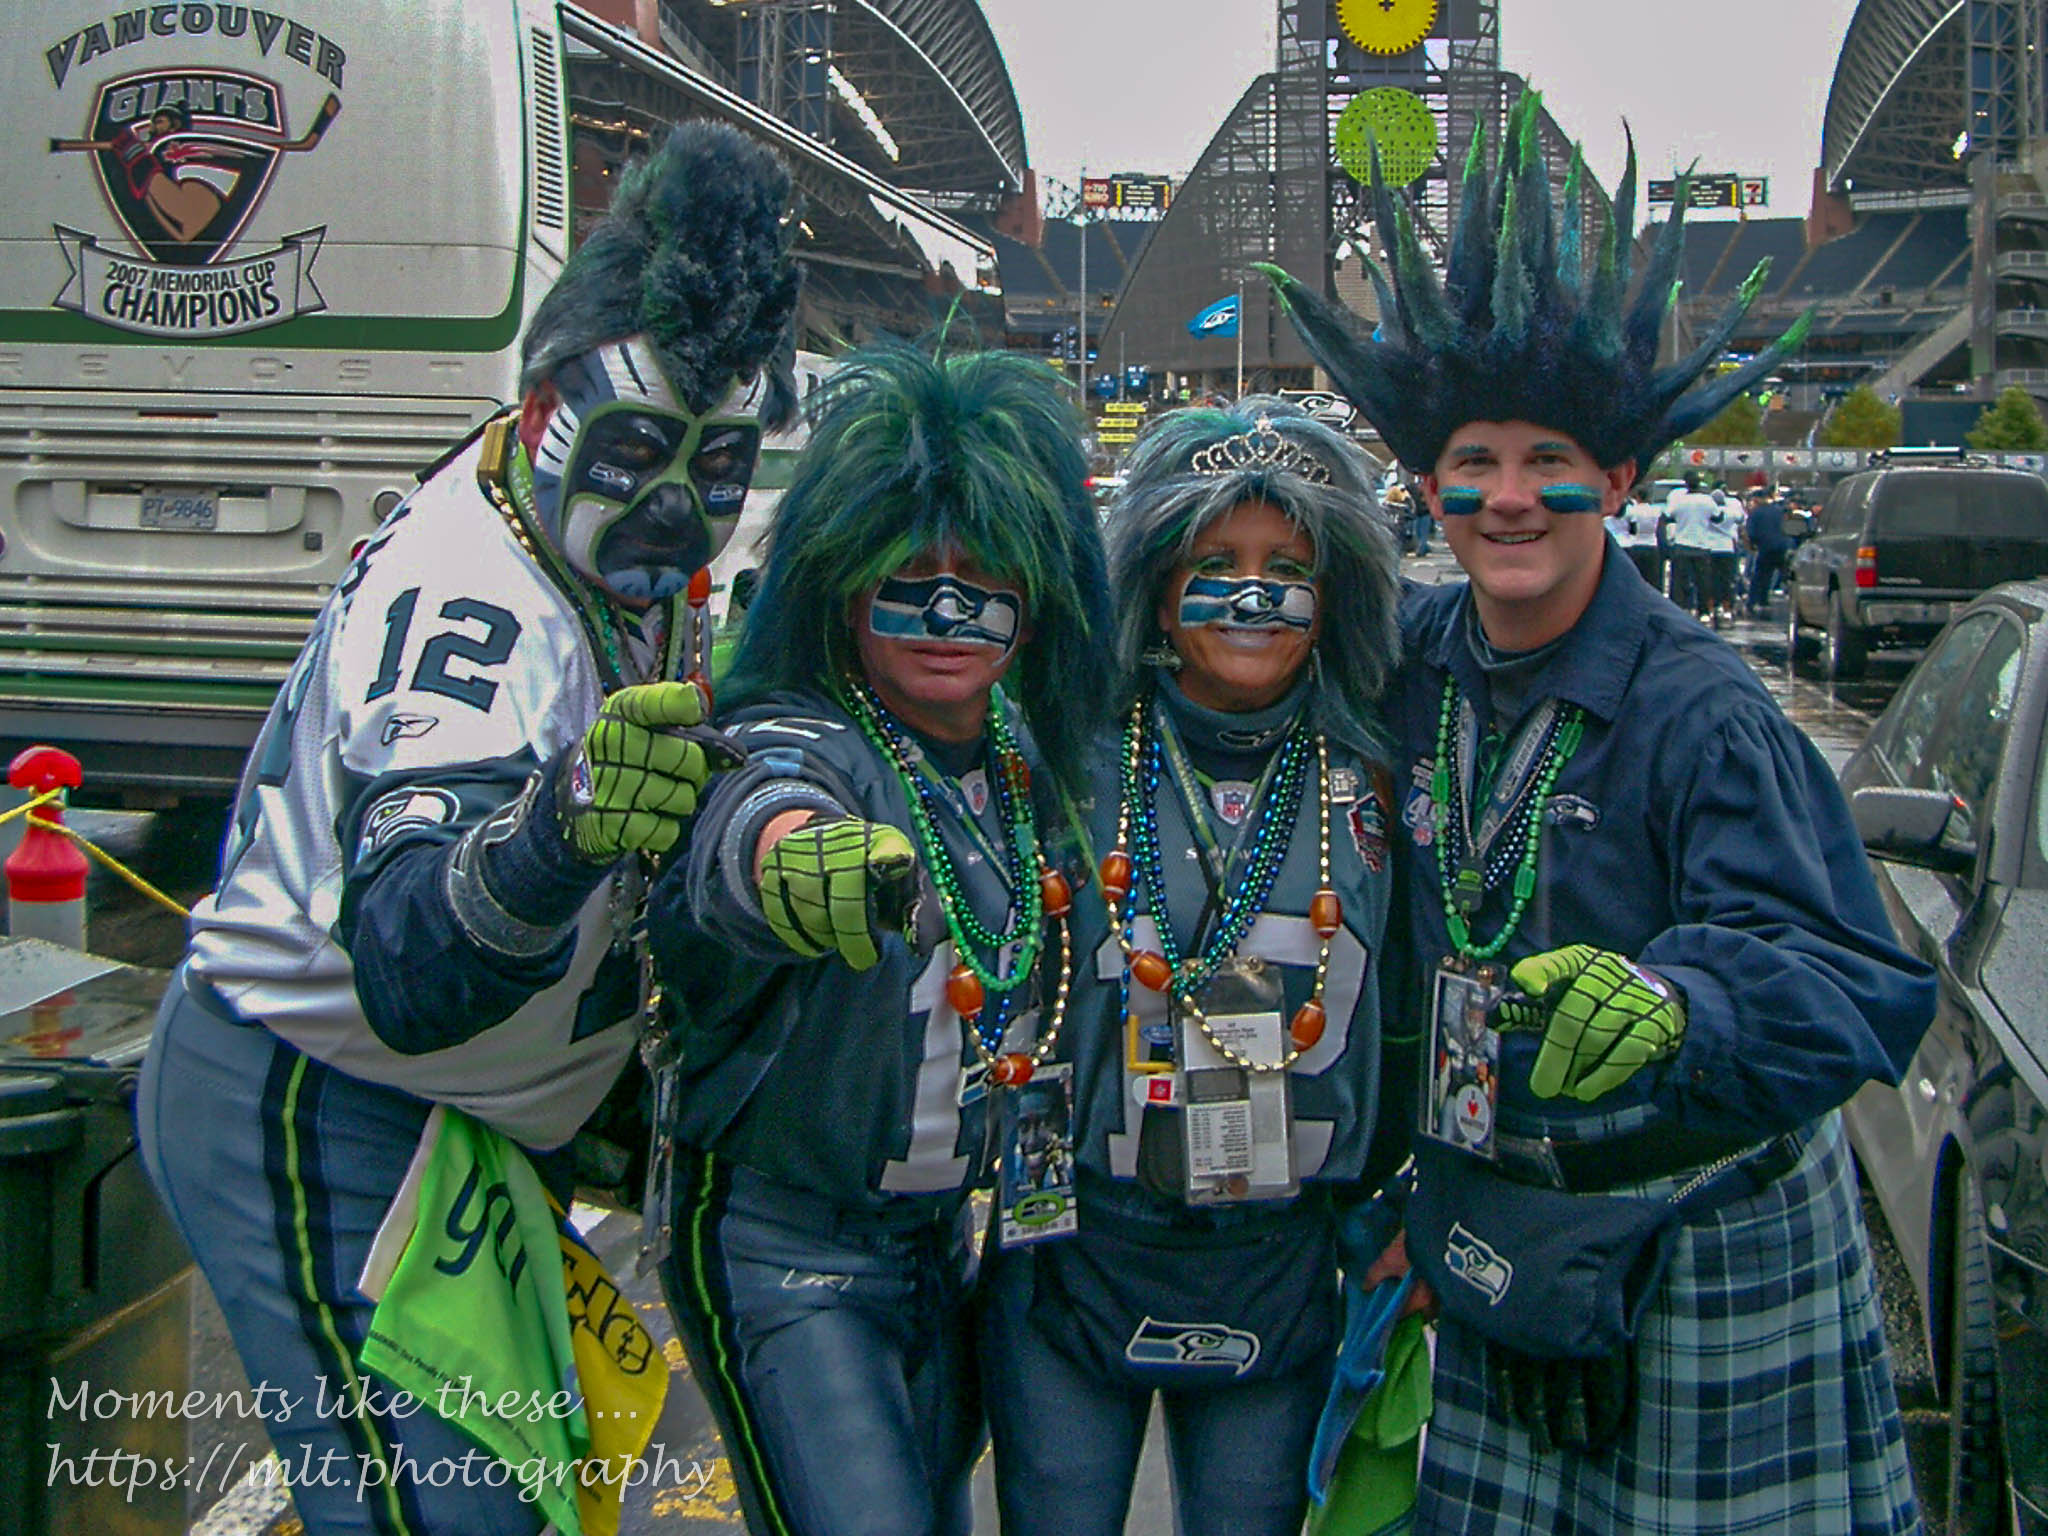 Mr & Mrs Seahawk and "family"